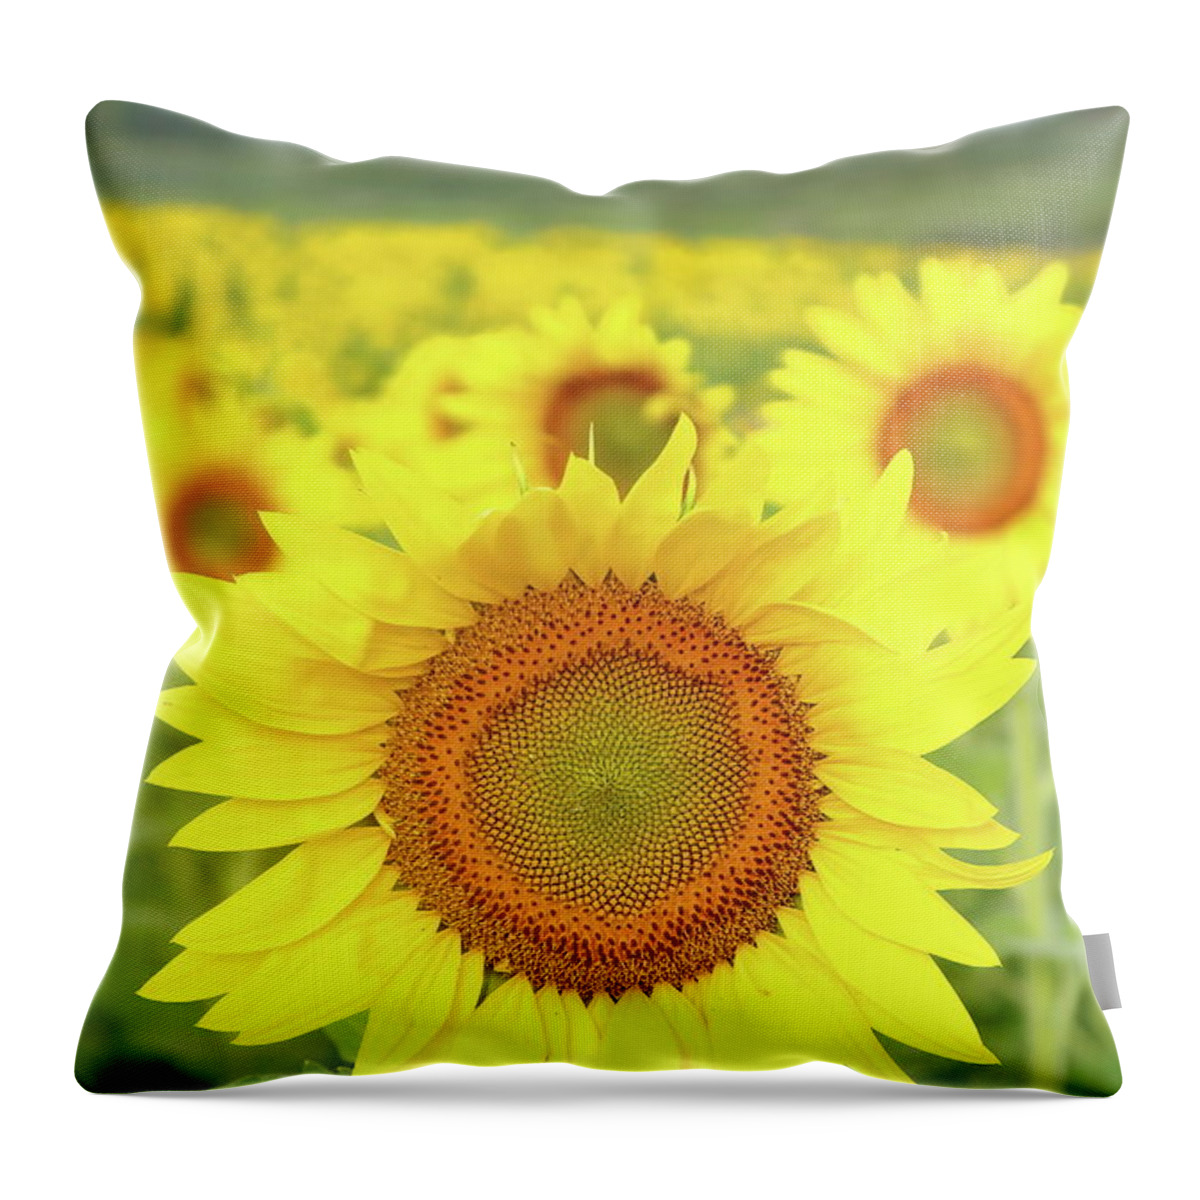 Sunflower Throw Pillow featuring the photograph Leader Of The Pack by Lens Art Photography By Larry Trager